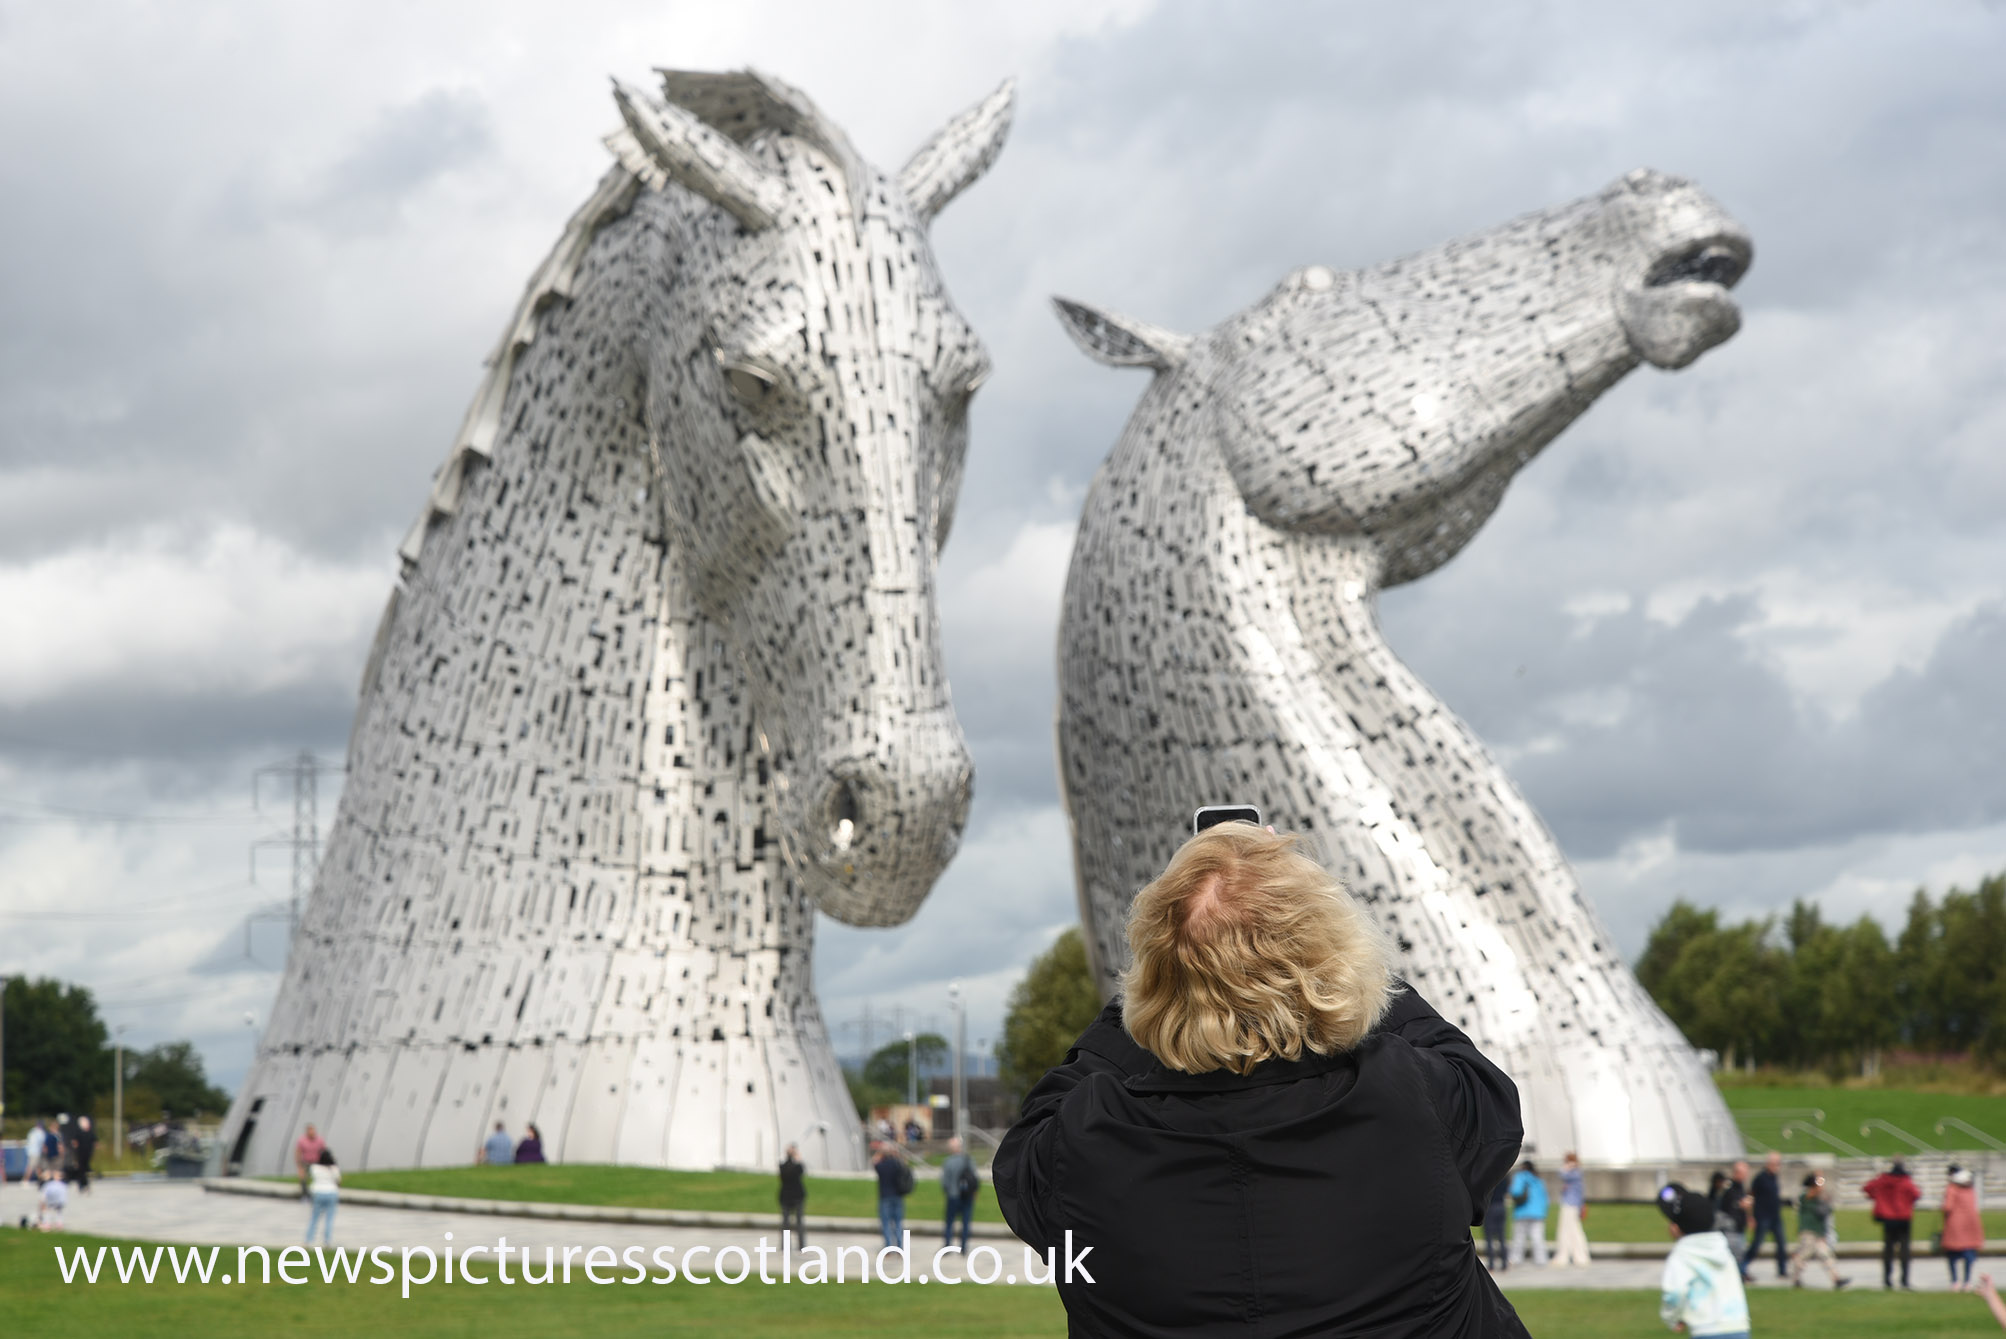 Visitor to the Kelpies